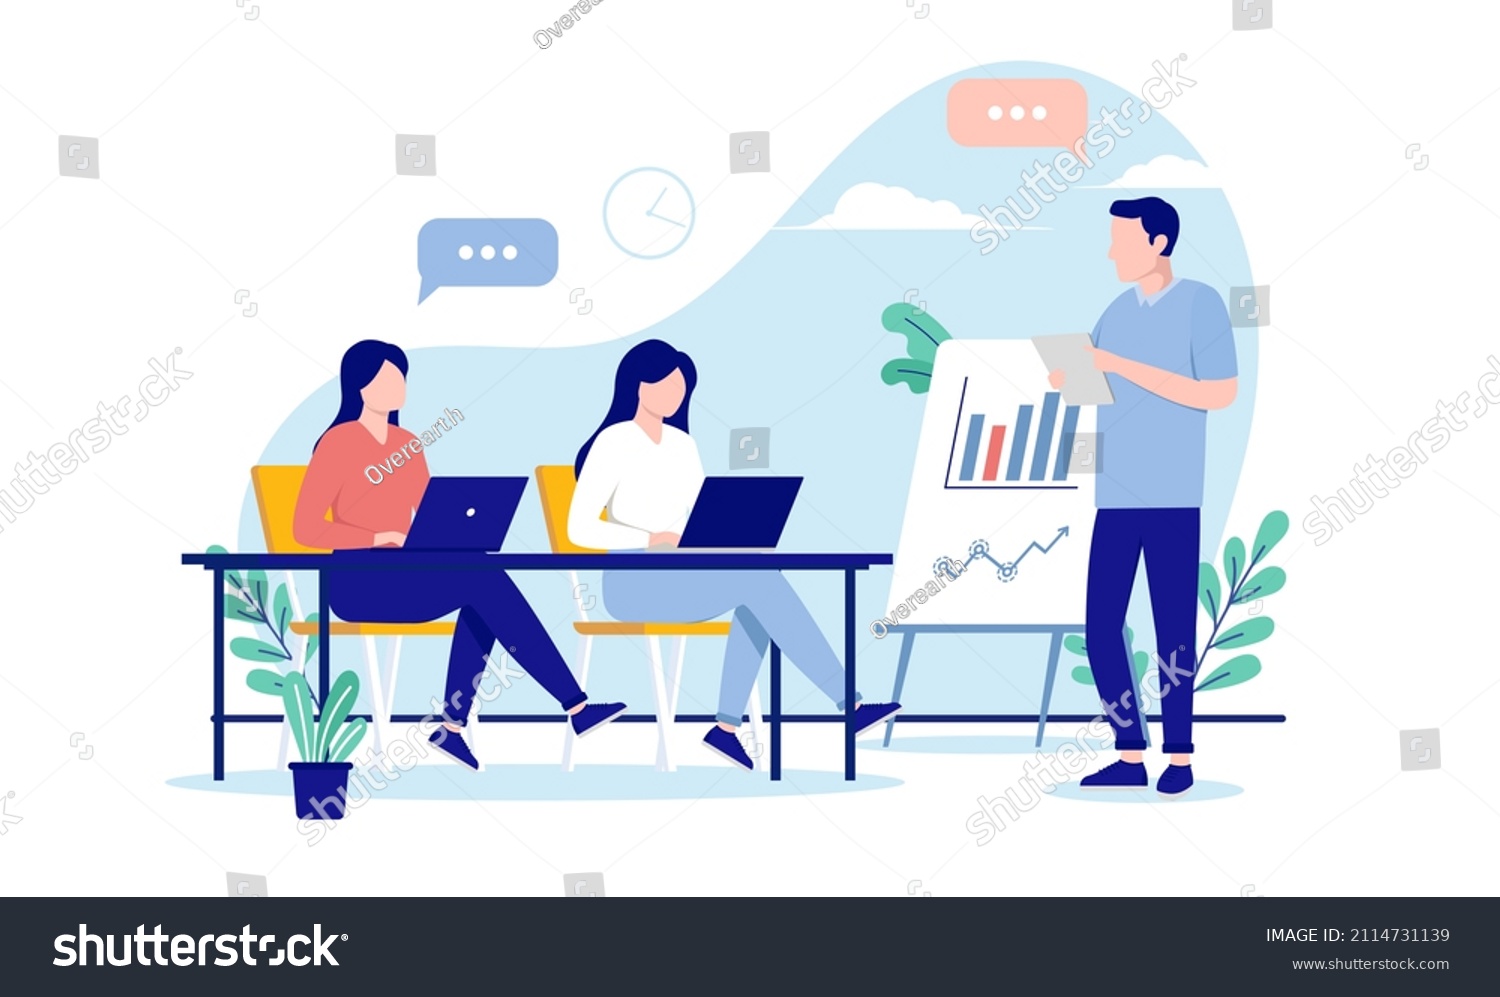 Business course - Male teacher presenting graphs and charts to students. Flat design vector illustration with white background #2114731139